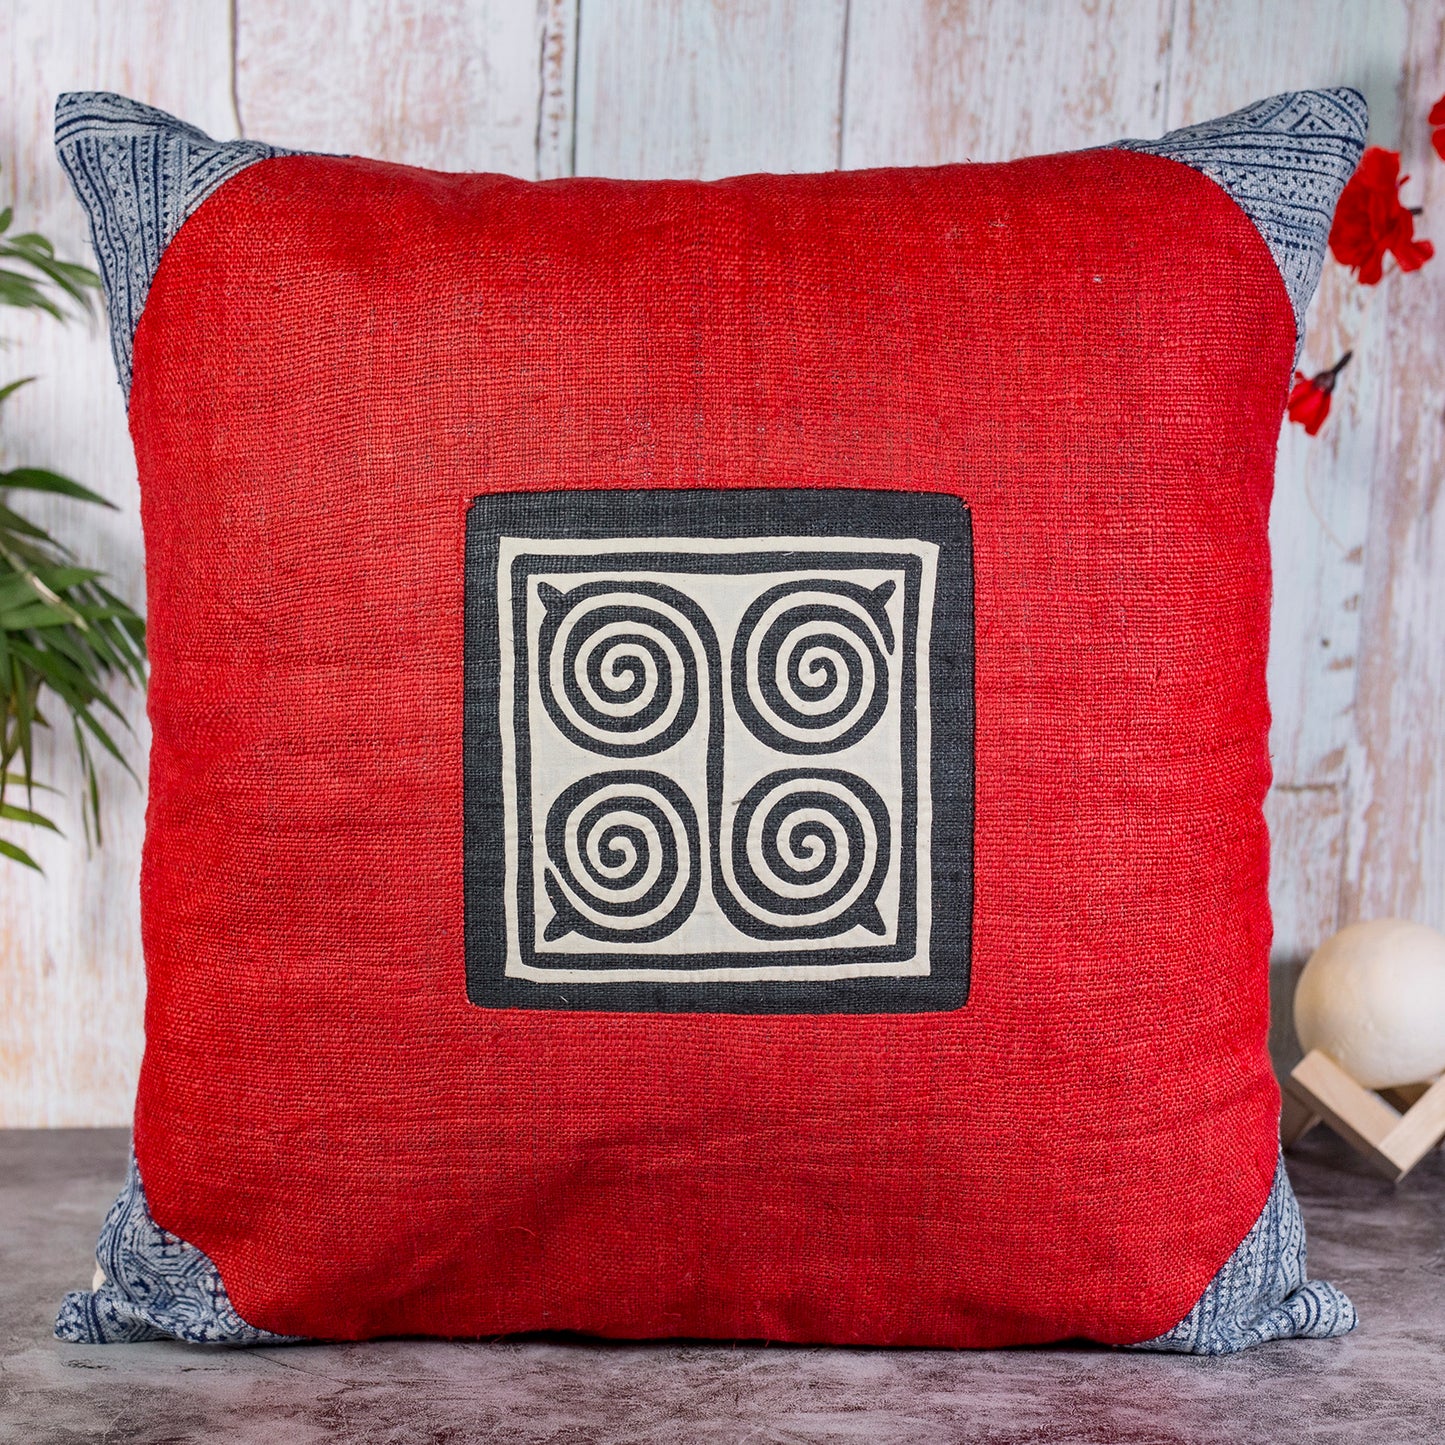 Red Hemp Cushion Cover, beeswax batik at corner, red hand-embroidered patch